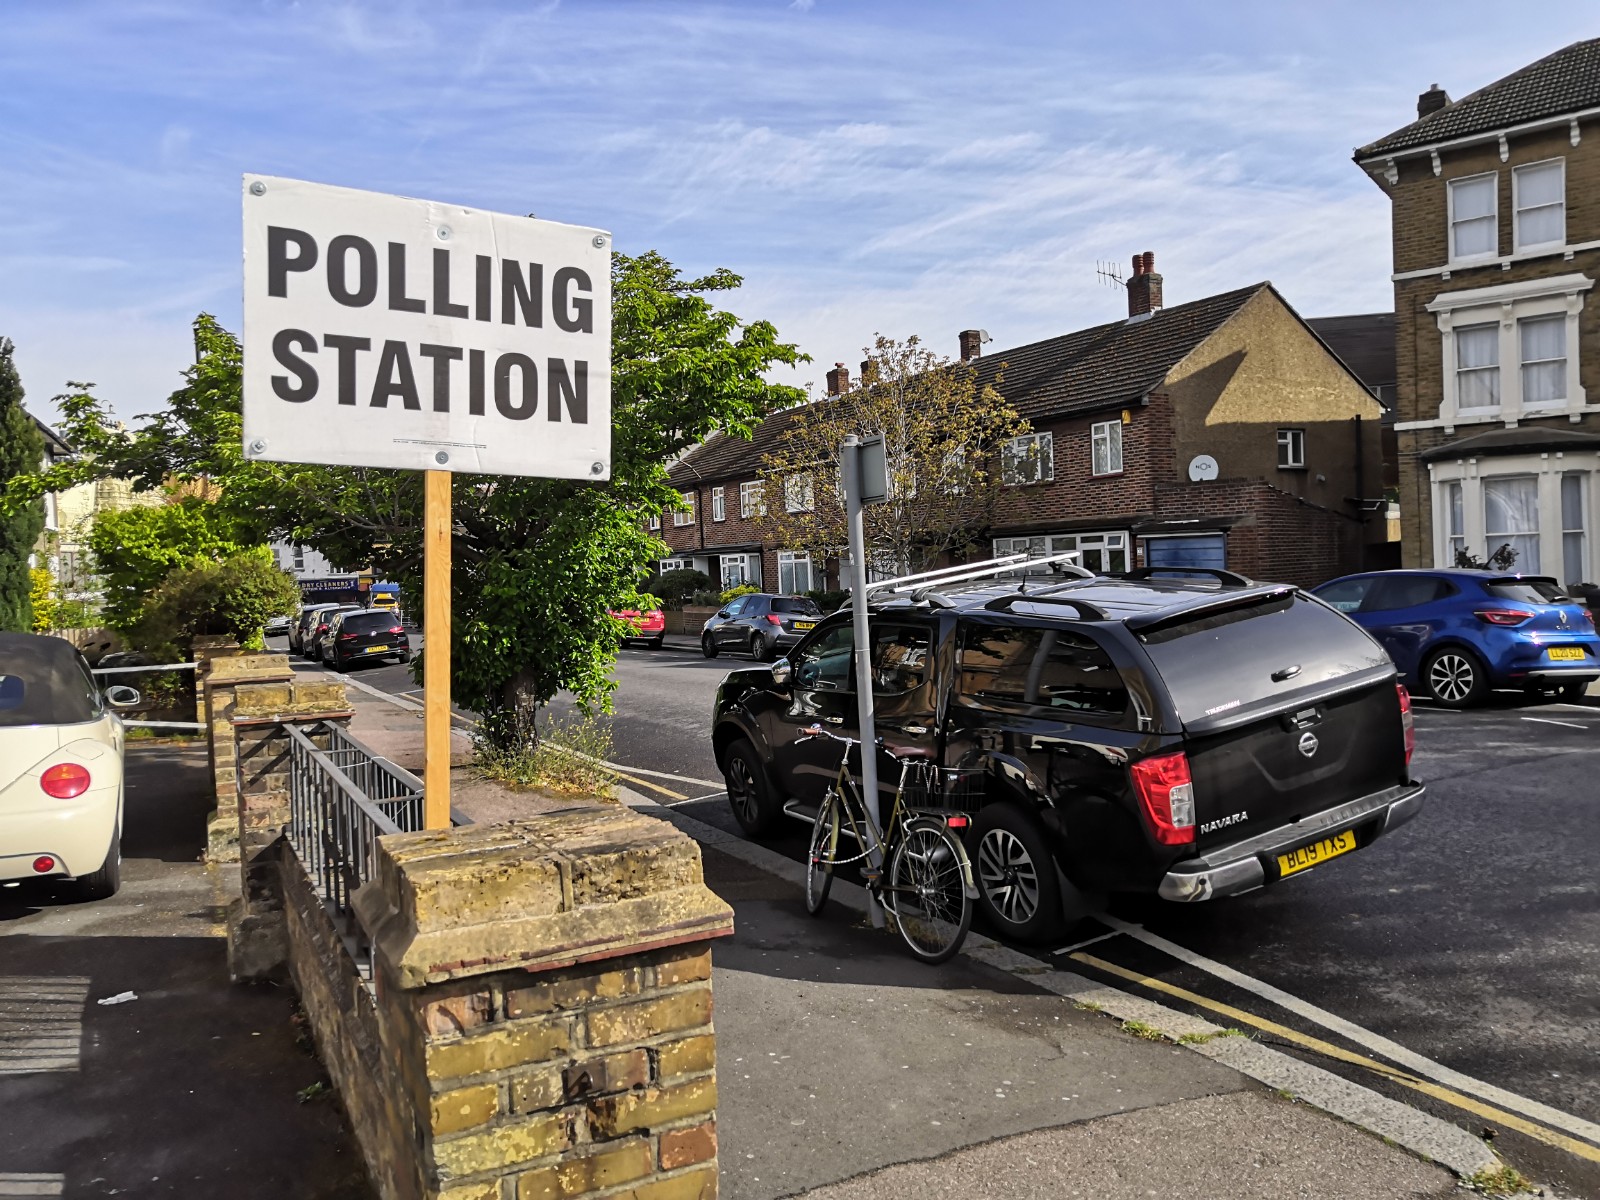 Polling Station sign on post